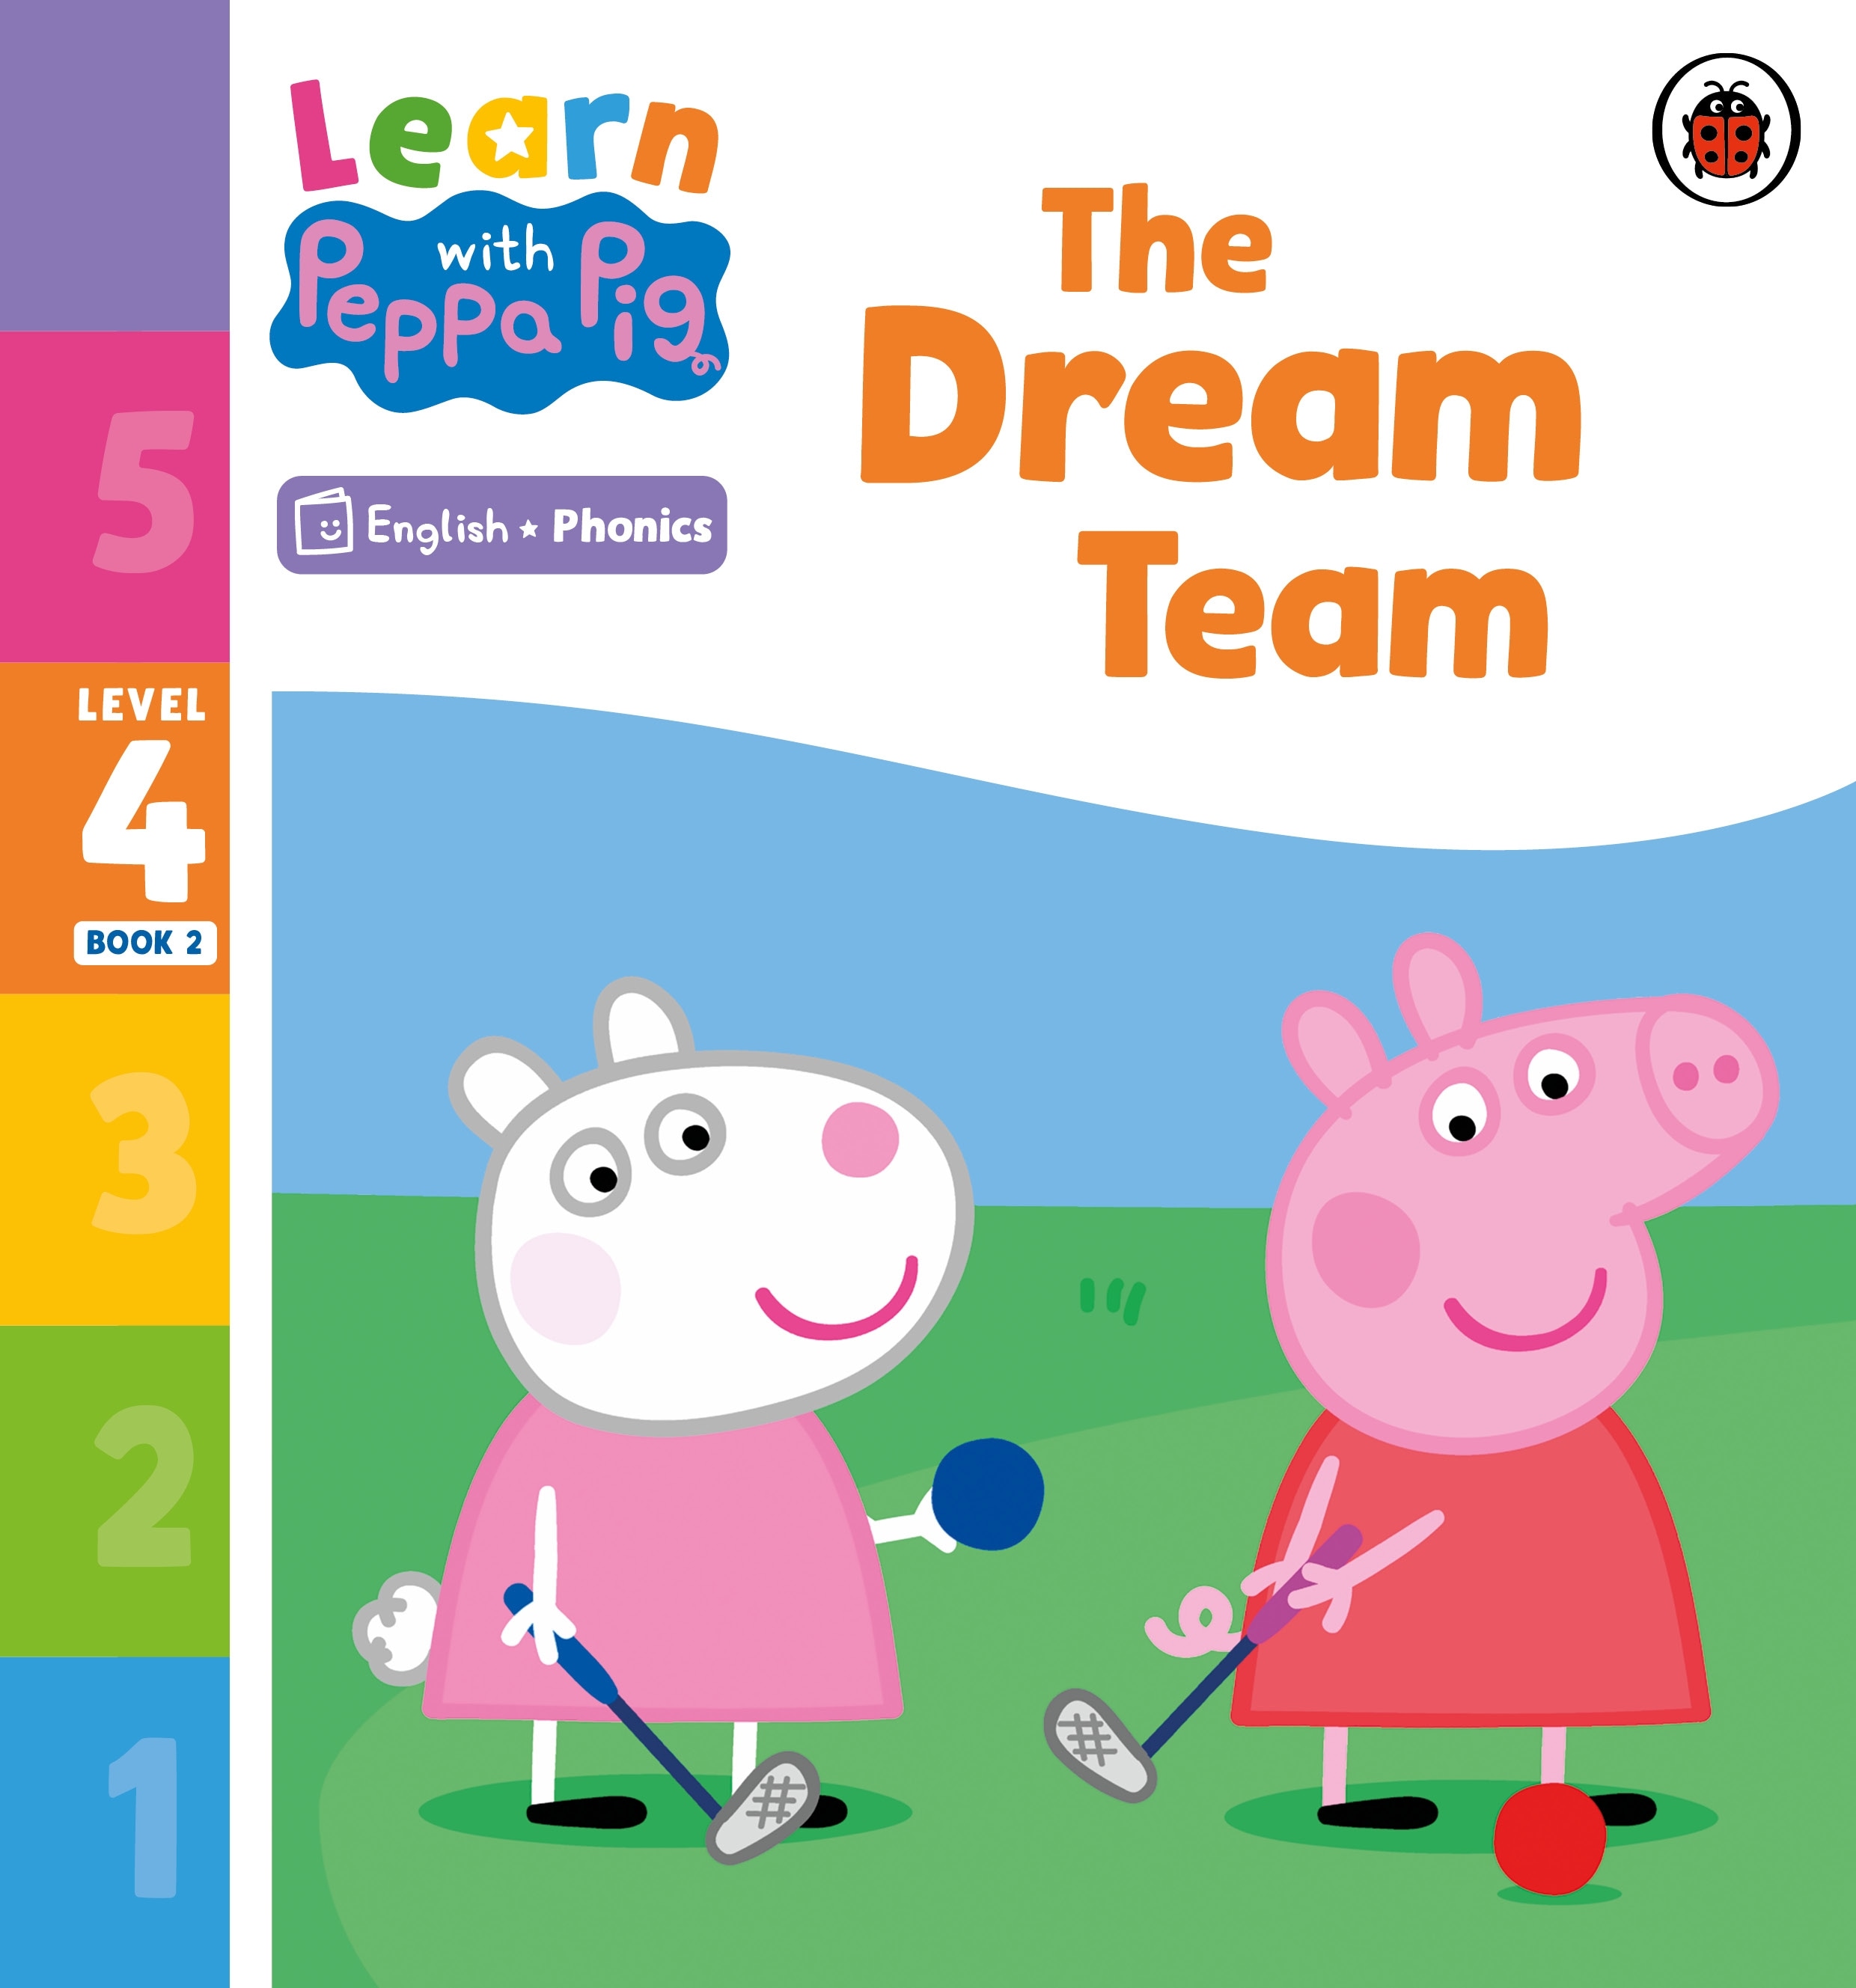 Learn with Peppa Phonics Level 4 Book 2 — The Dream Team (Phonics Reader)